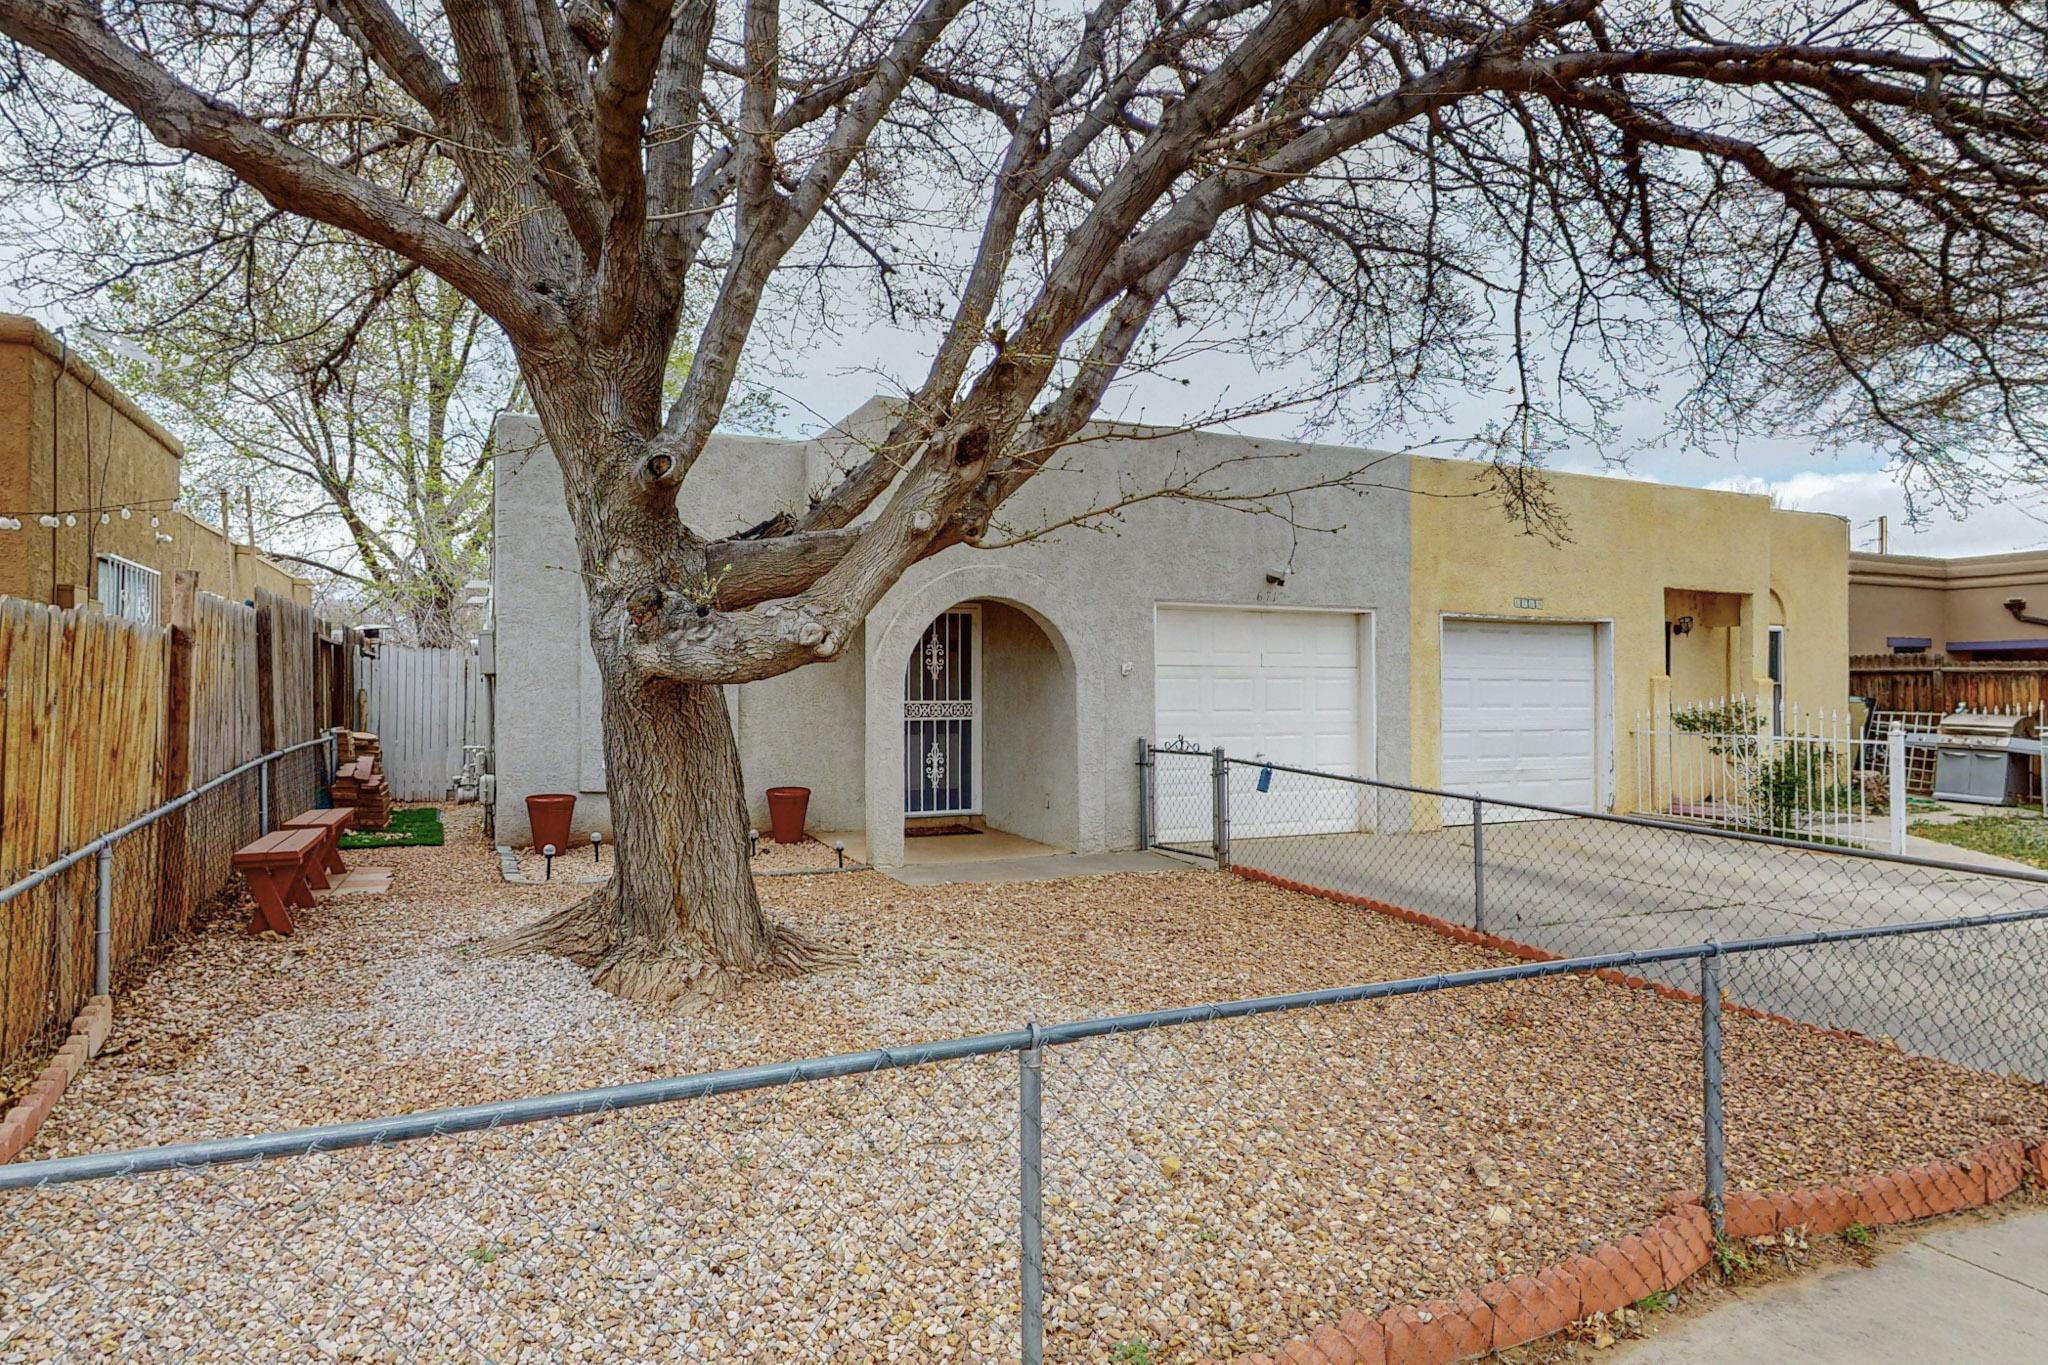 Welcome to this charming and cozy townhome! This inviting home boasts an open floor plan. Kitchen appliances that have been recently replaced. Step into the beautifully landscaped backyard and enjoy the peaceful sounds of a waterfall in the evenings. This hidden gem is located in the Southwest of Albuquerque and is conveniently within walking distance from the Alamosa Community Center, and Alamosa Park. Do you need to do your weekly shopping? No problem! The Coors Central shopping center is just 5 minutes away! This home will NOT last! Come check it out today!